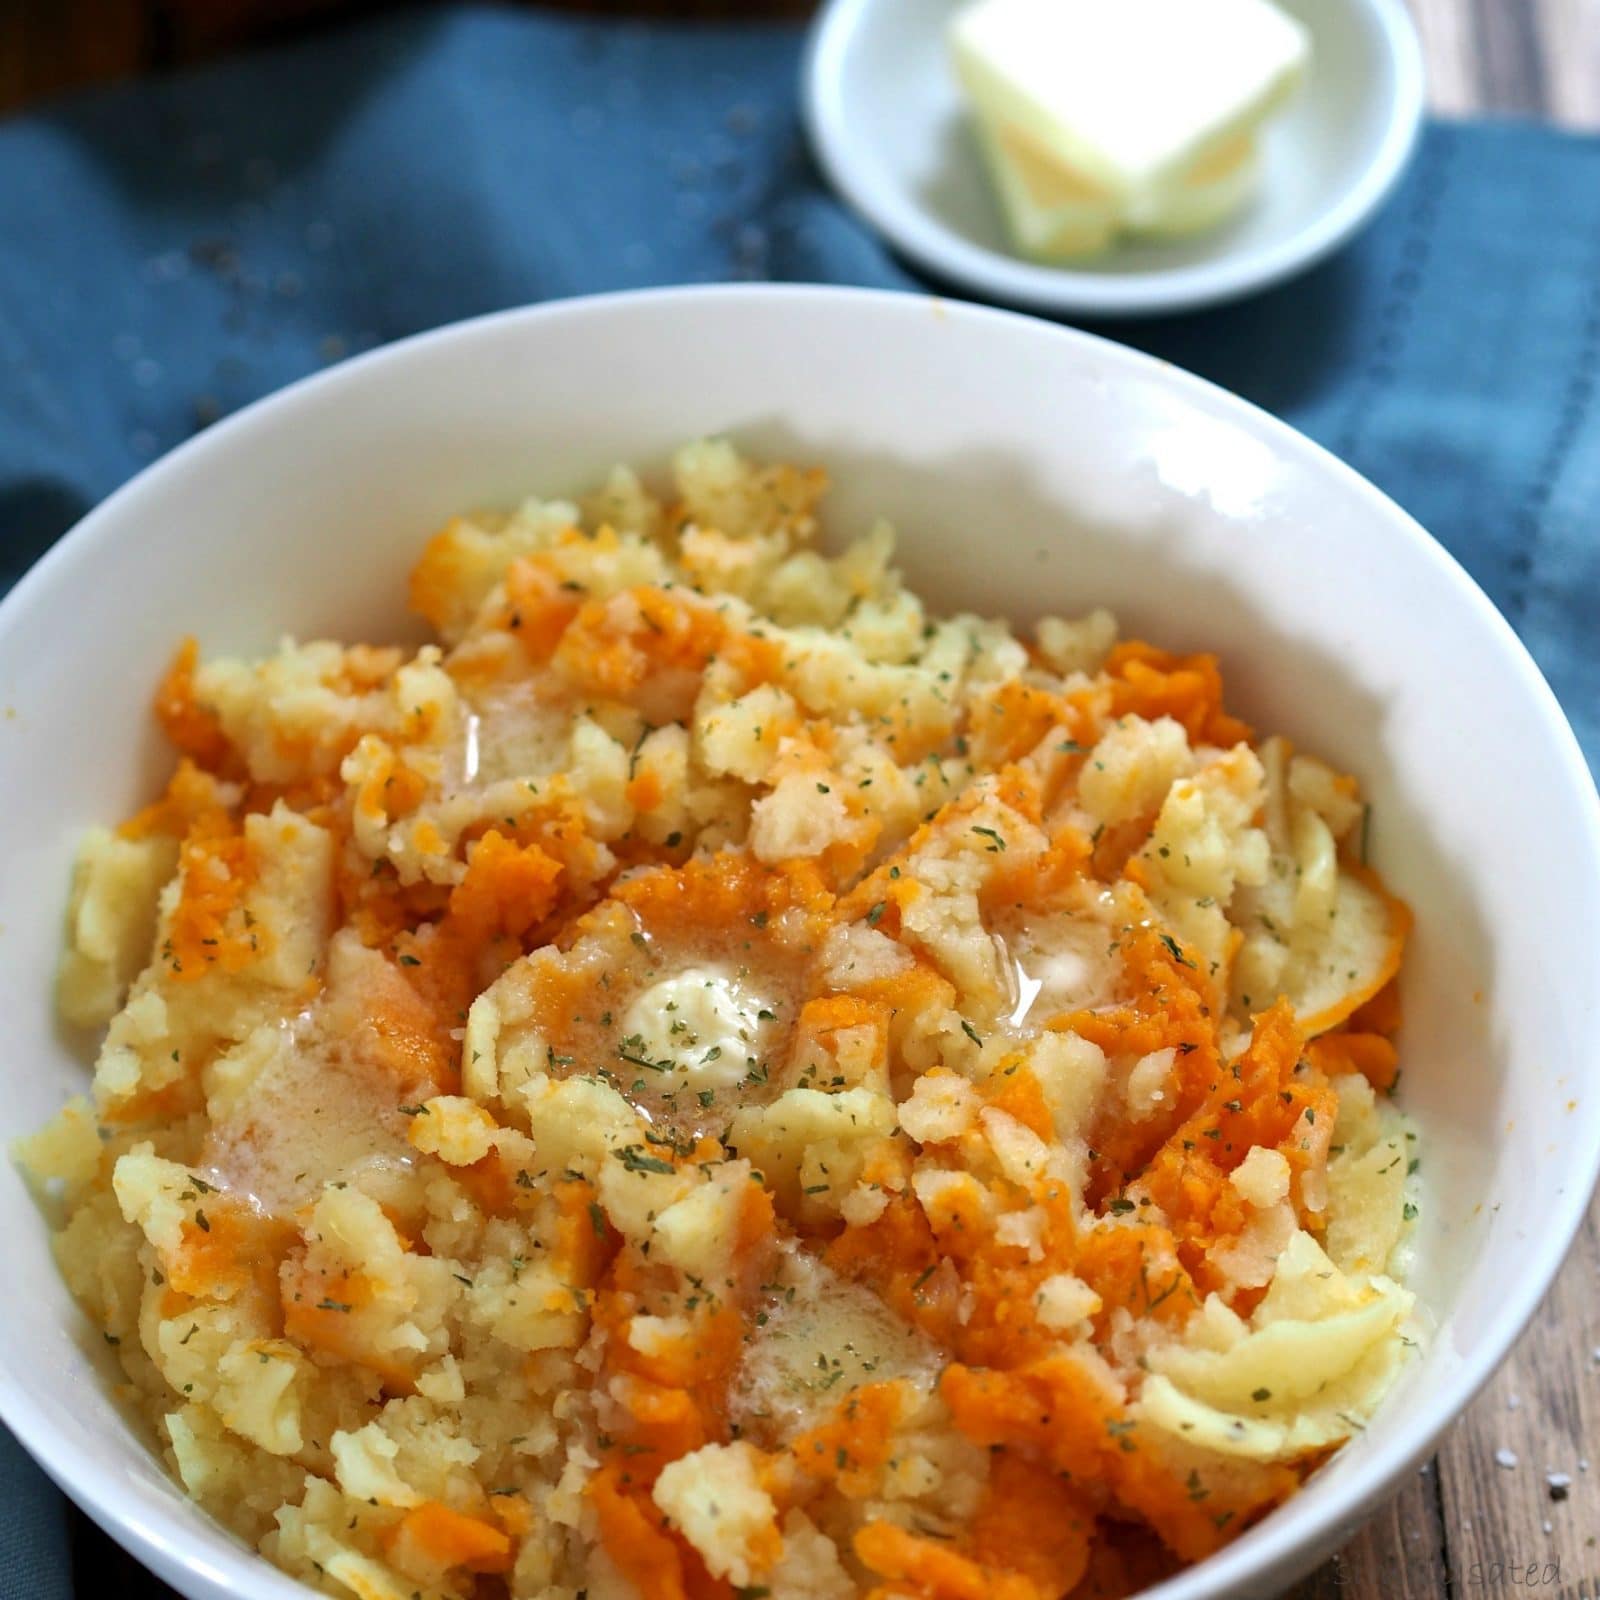 Sweet & Gold Mashed Potatoes. Sweet Potatoes & Yukon Golds are steamed then mixed with butter, salt & pepper - the best mashed potatoes - ever! Simply Sated